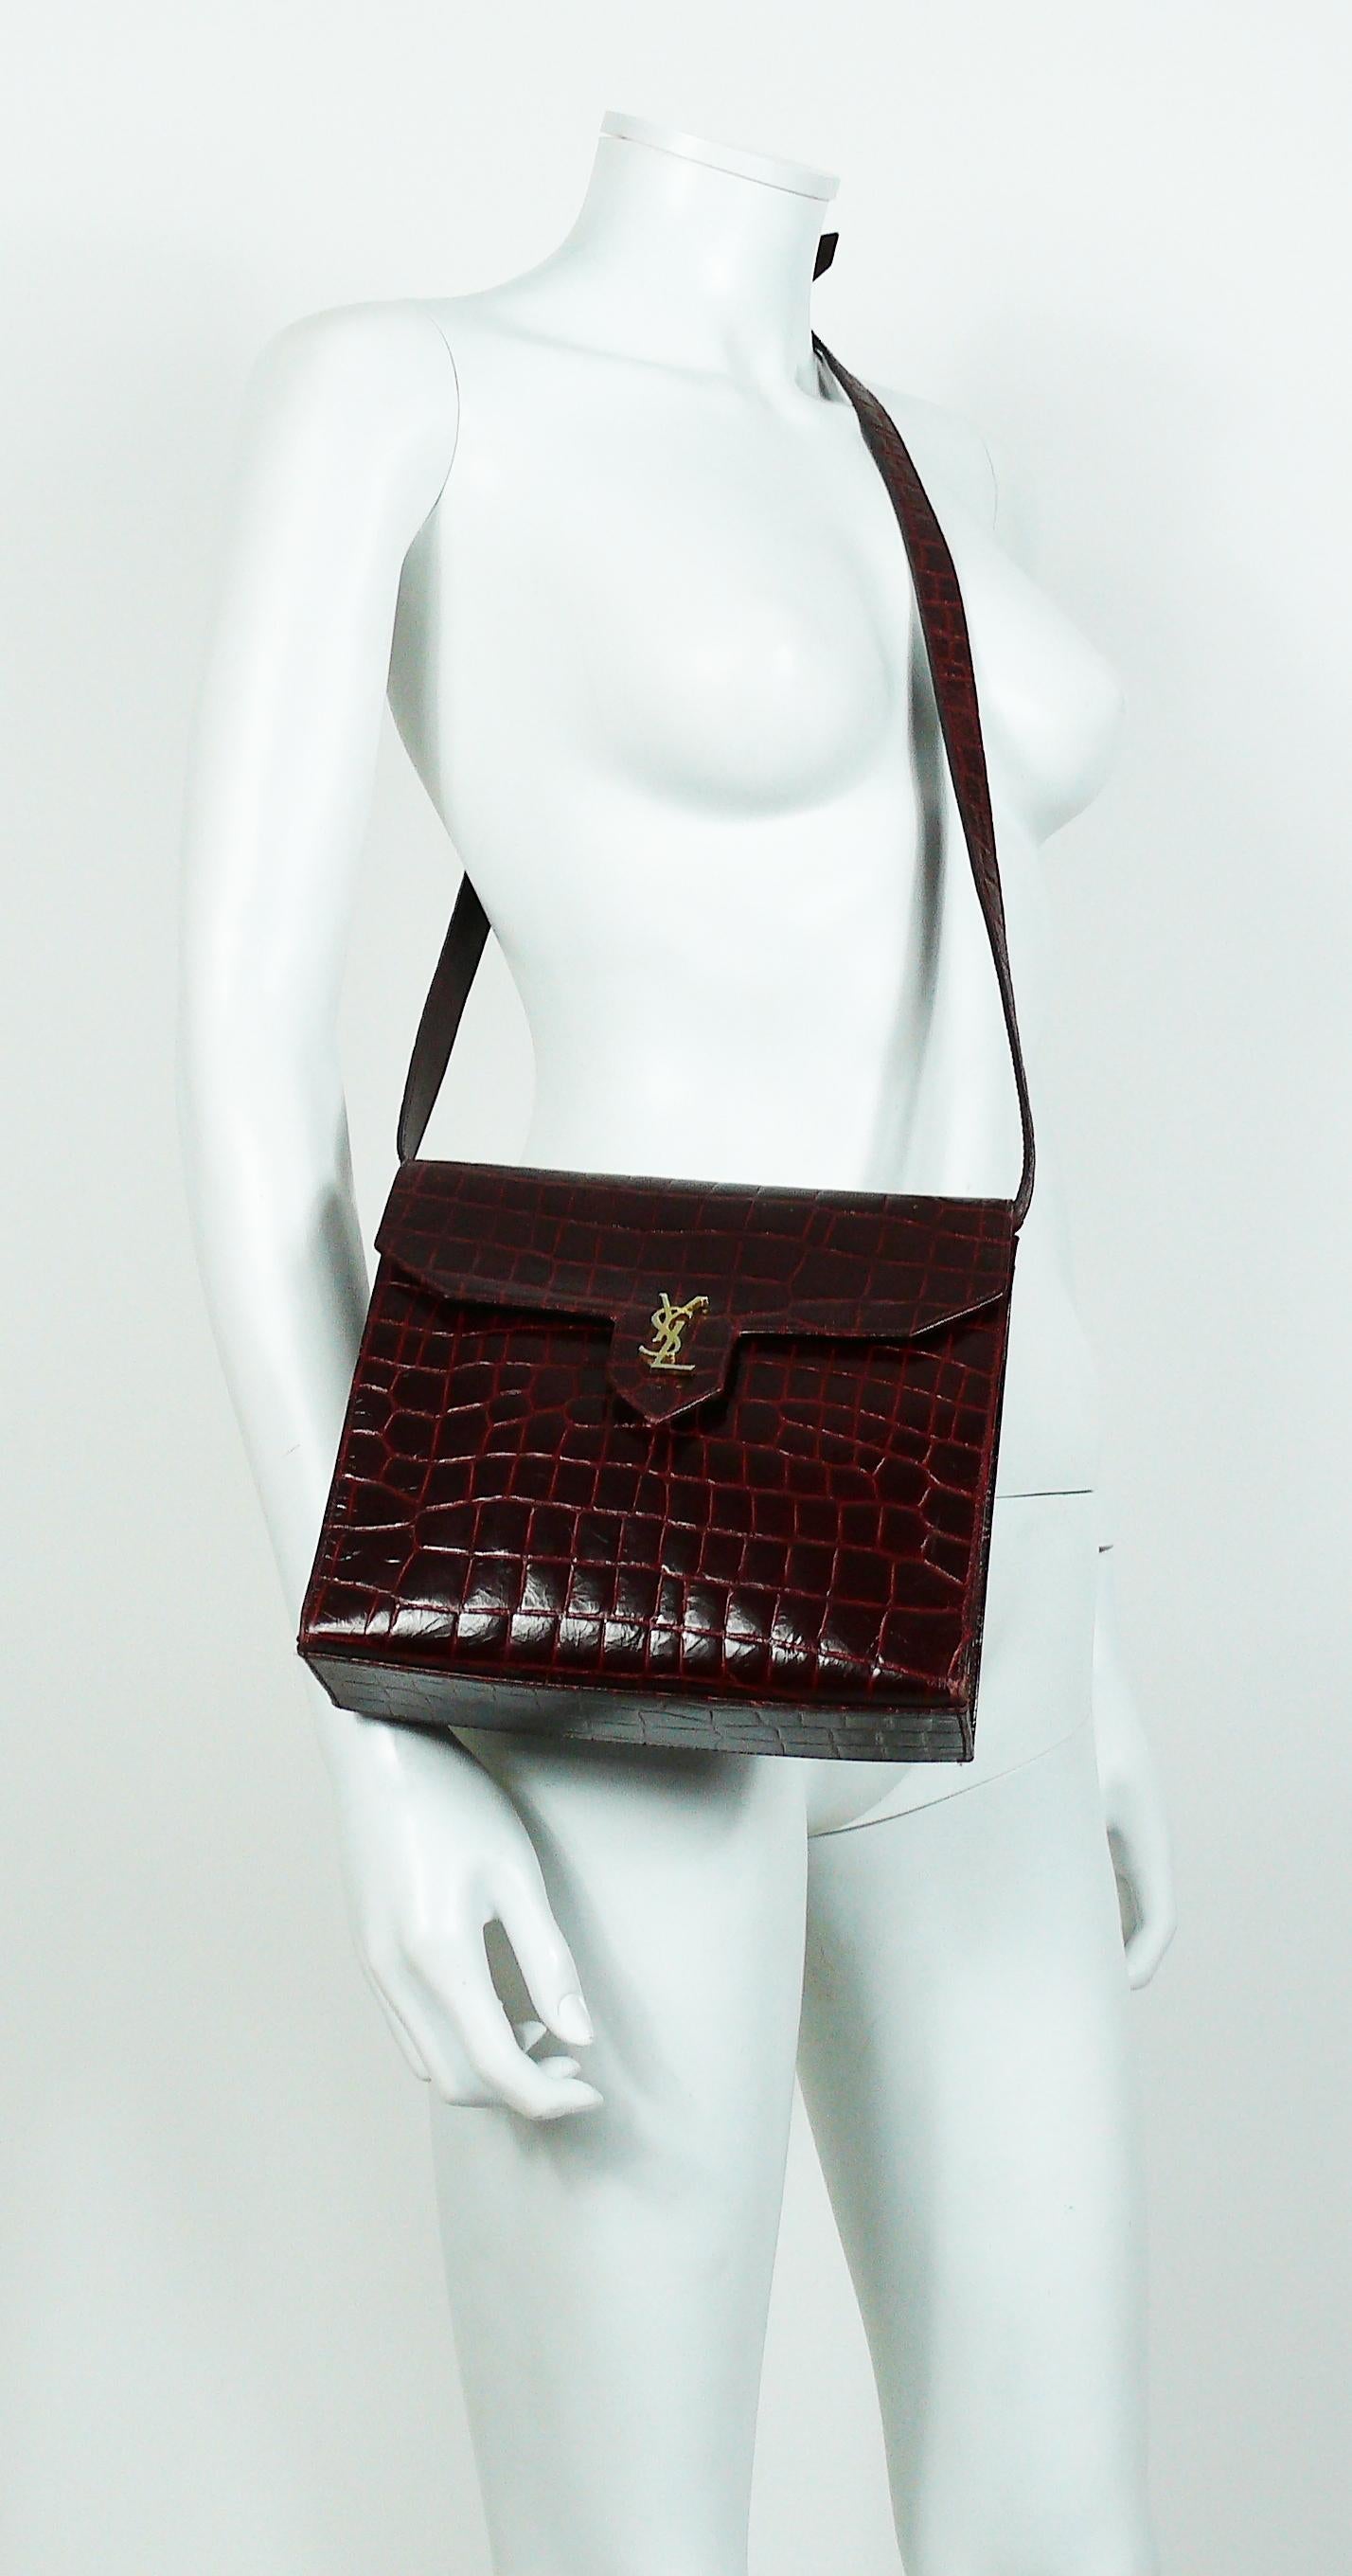 YVES SAINT LAURENT vintage bordeaux red leather croc embossed shoulder bag.

Can be also worn as a clutch.

This bag features :
- Bordeaux red leather croc embossed body.
- Gold toned YSL logo at front.
- Snap button closure.
- Black fabric lining